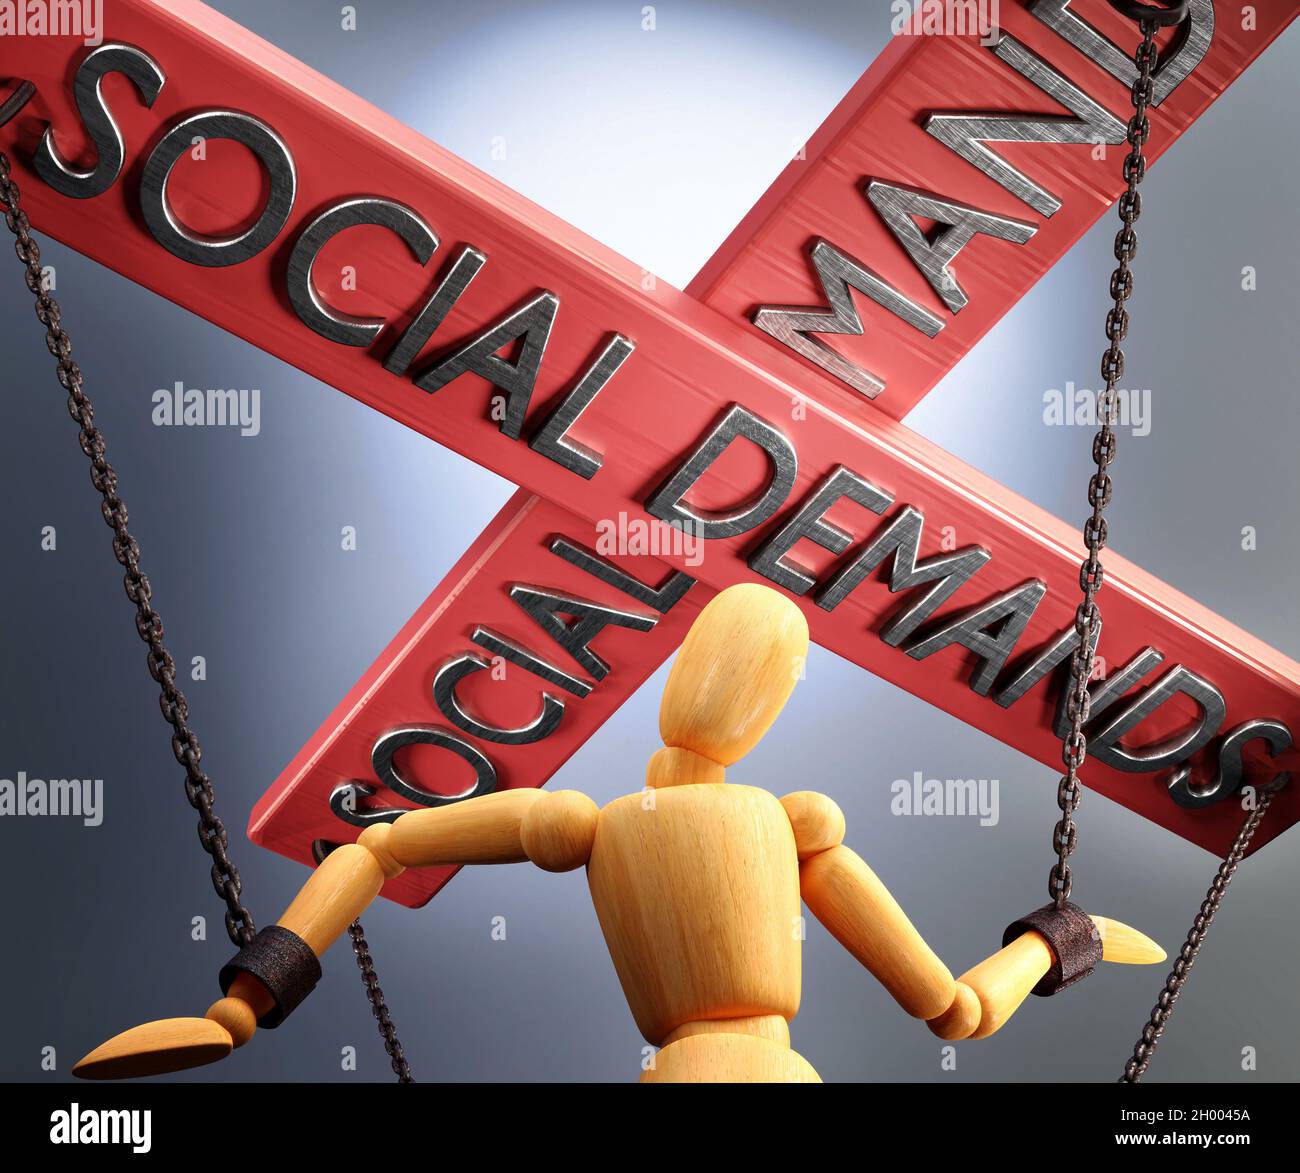 Social demands control, power, authority and manipulation symbolized by control bar with word Social demands pulling the strings (chains) of a wooden Stock Photo